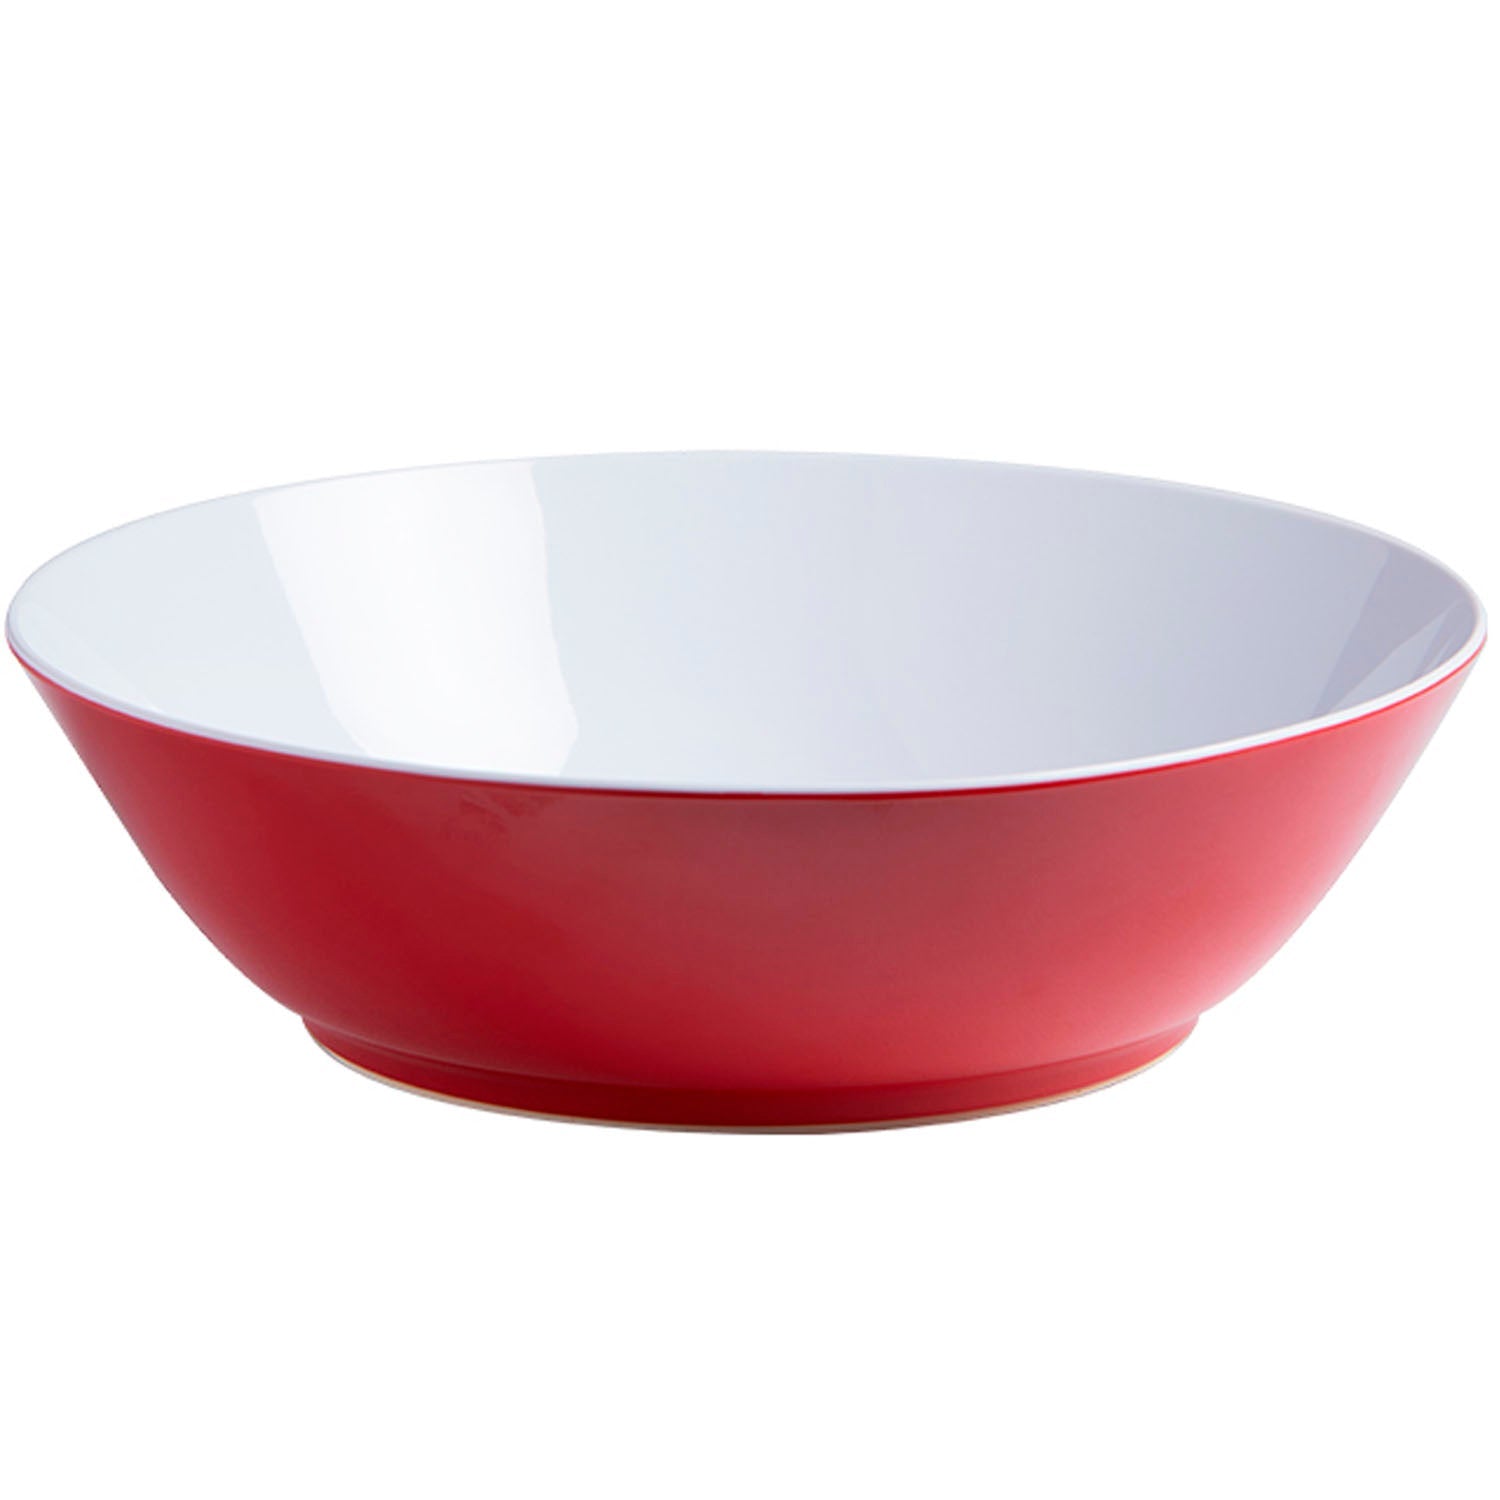 WELCOME ON BOARD SOUP BOWL X6